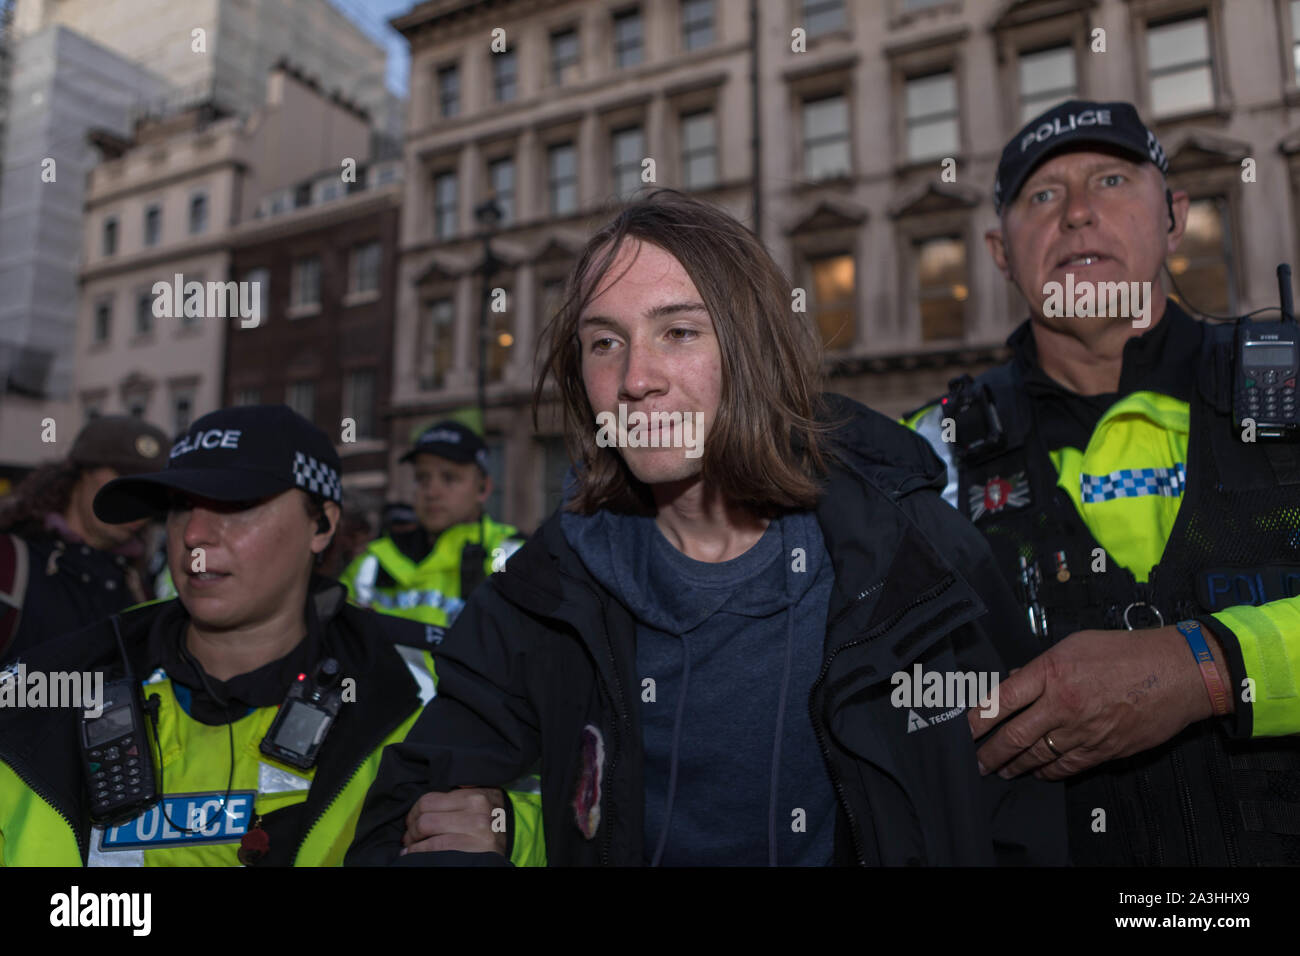 Westminster, London, UK. 8th Oct, 2019. Extinction rebellion protesters locked together on Whitehall, Westminster. Police use cutting gear to set them free. Penelope Barritt/Alamy Live News Stock Photo